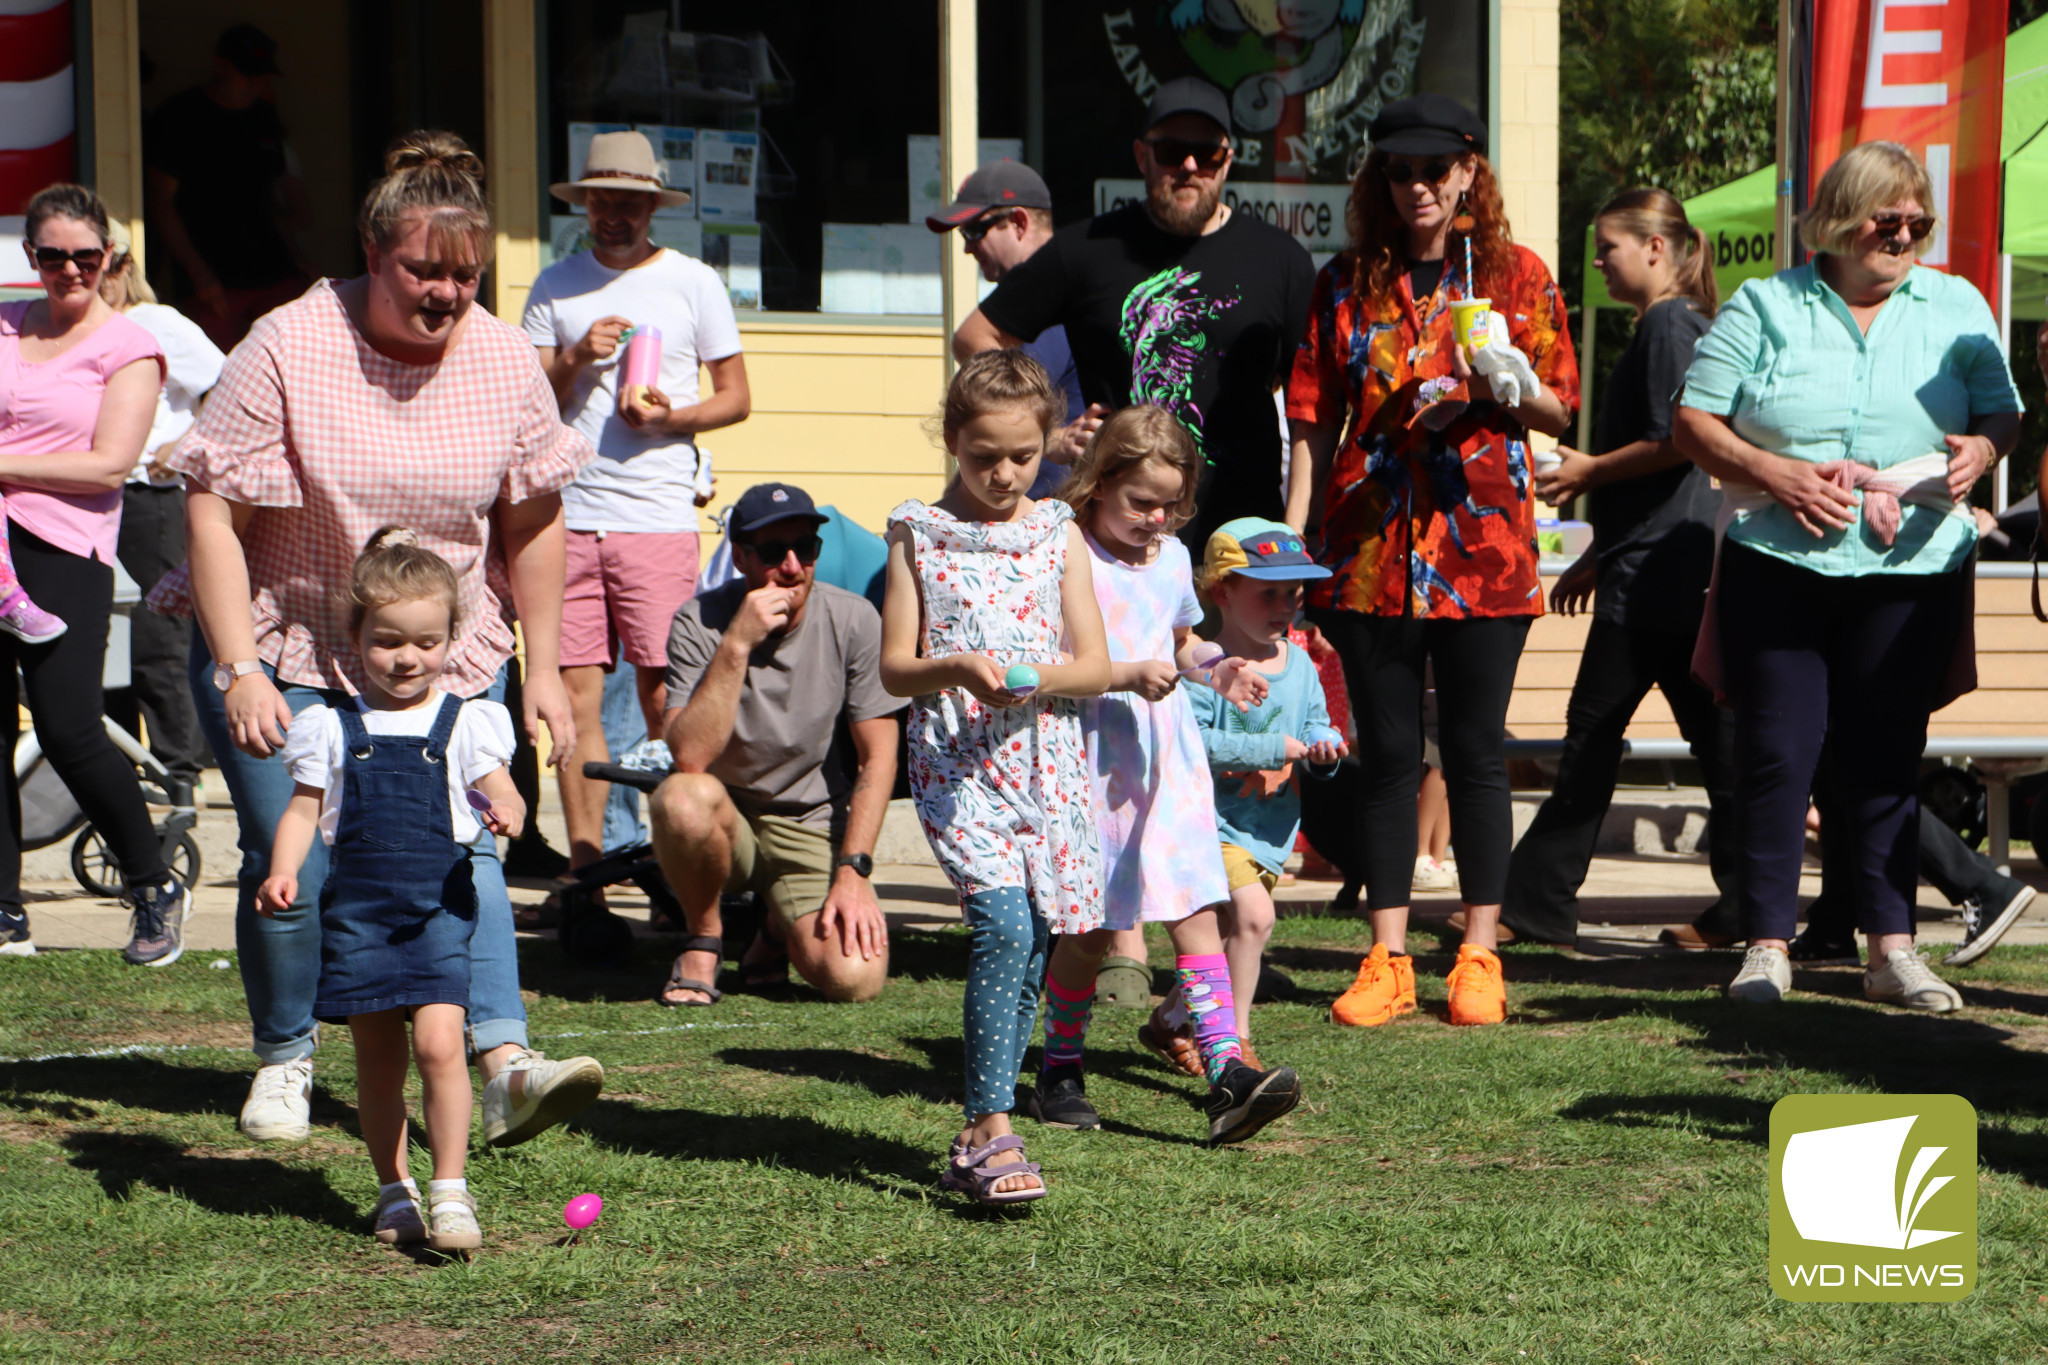 A number of family friendly games were played, including egg and spoon races.